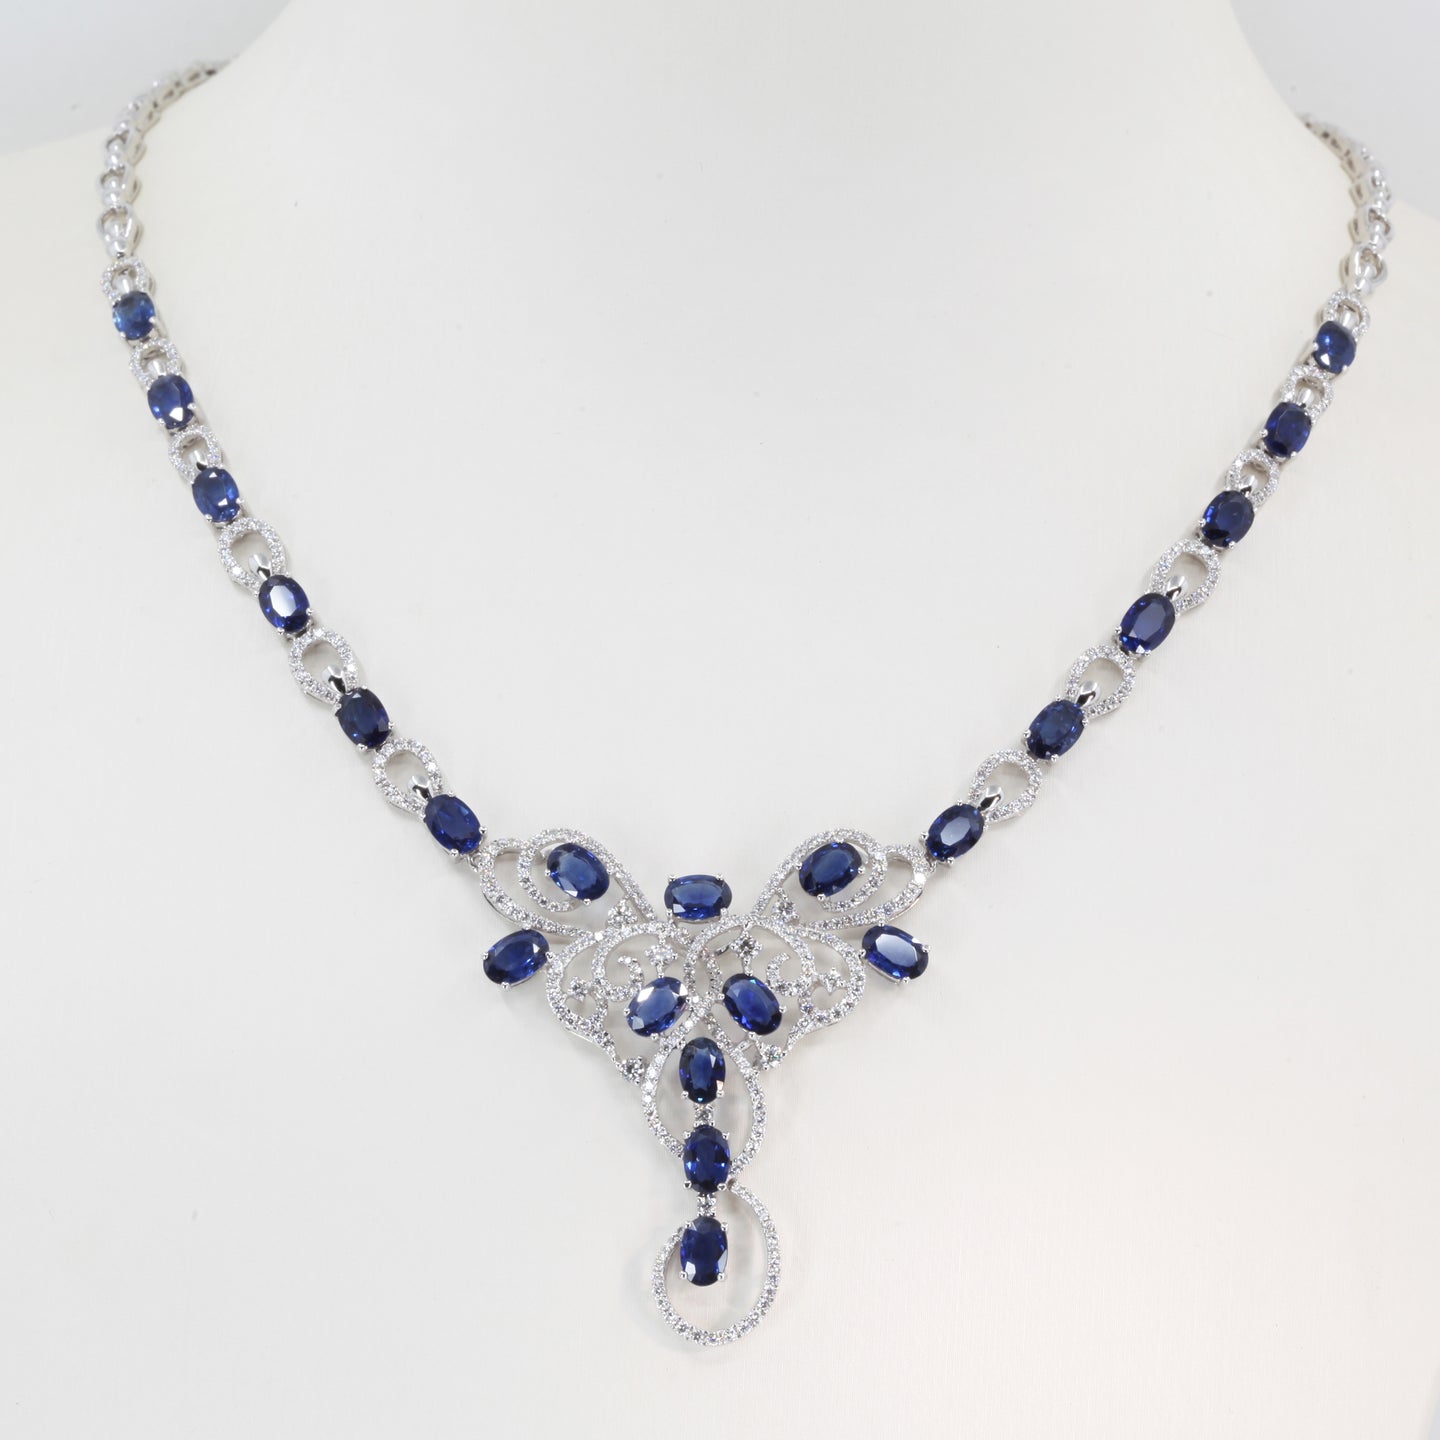 18K Solid White Gold Diamond Sapphire Necklace S12.65 CT